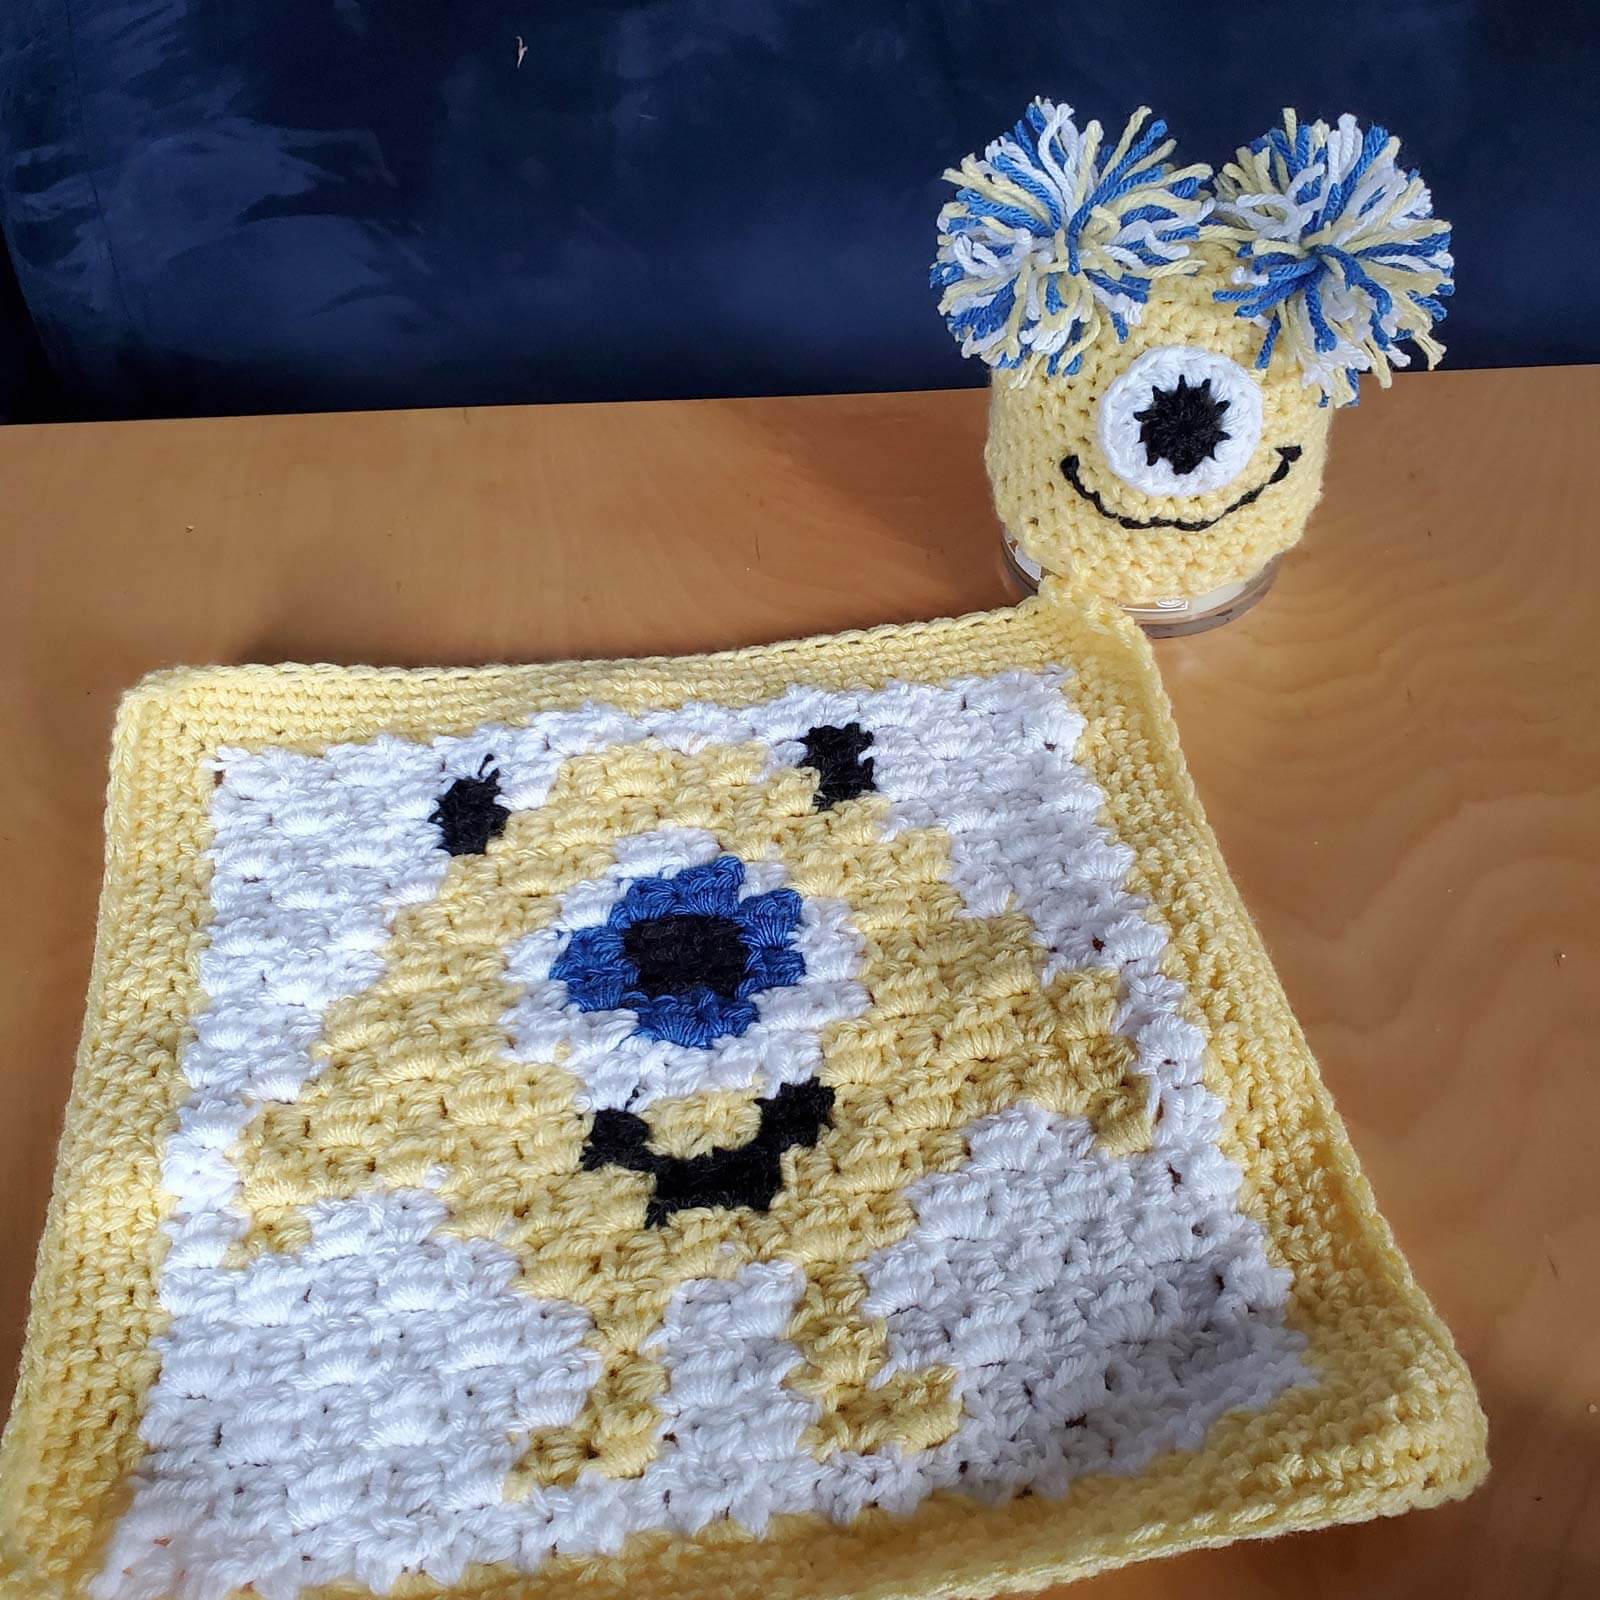 A crochet doll and small crochet towel